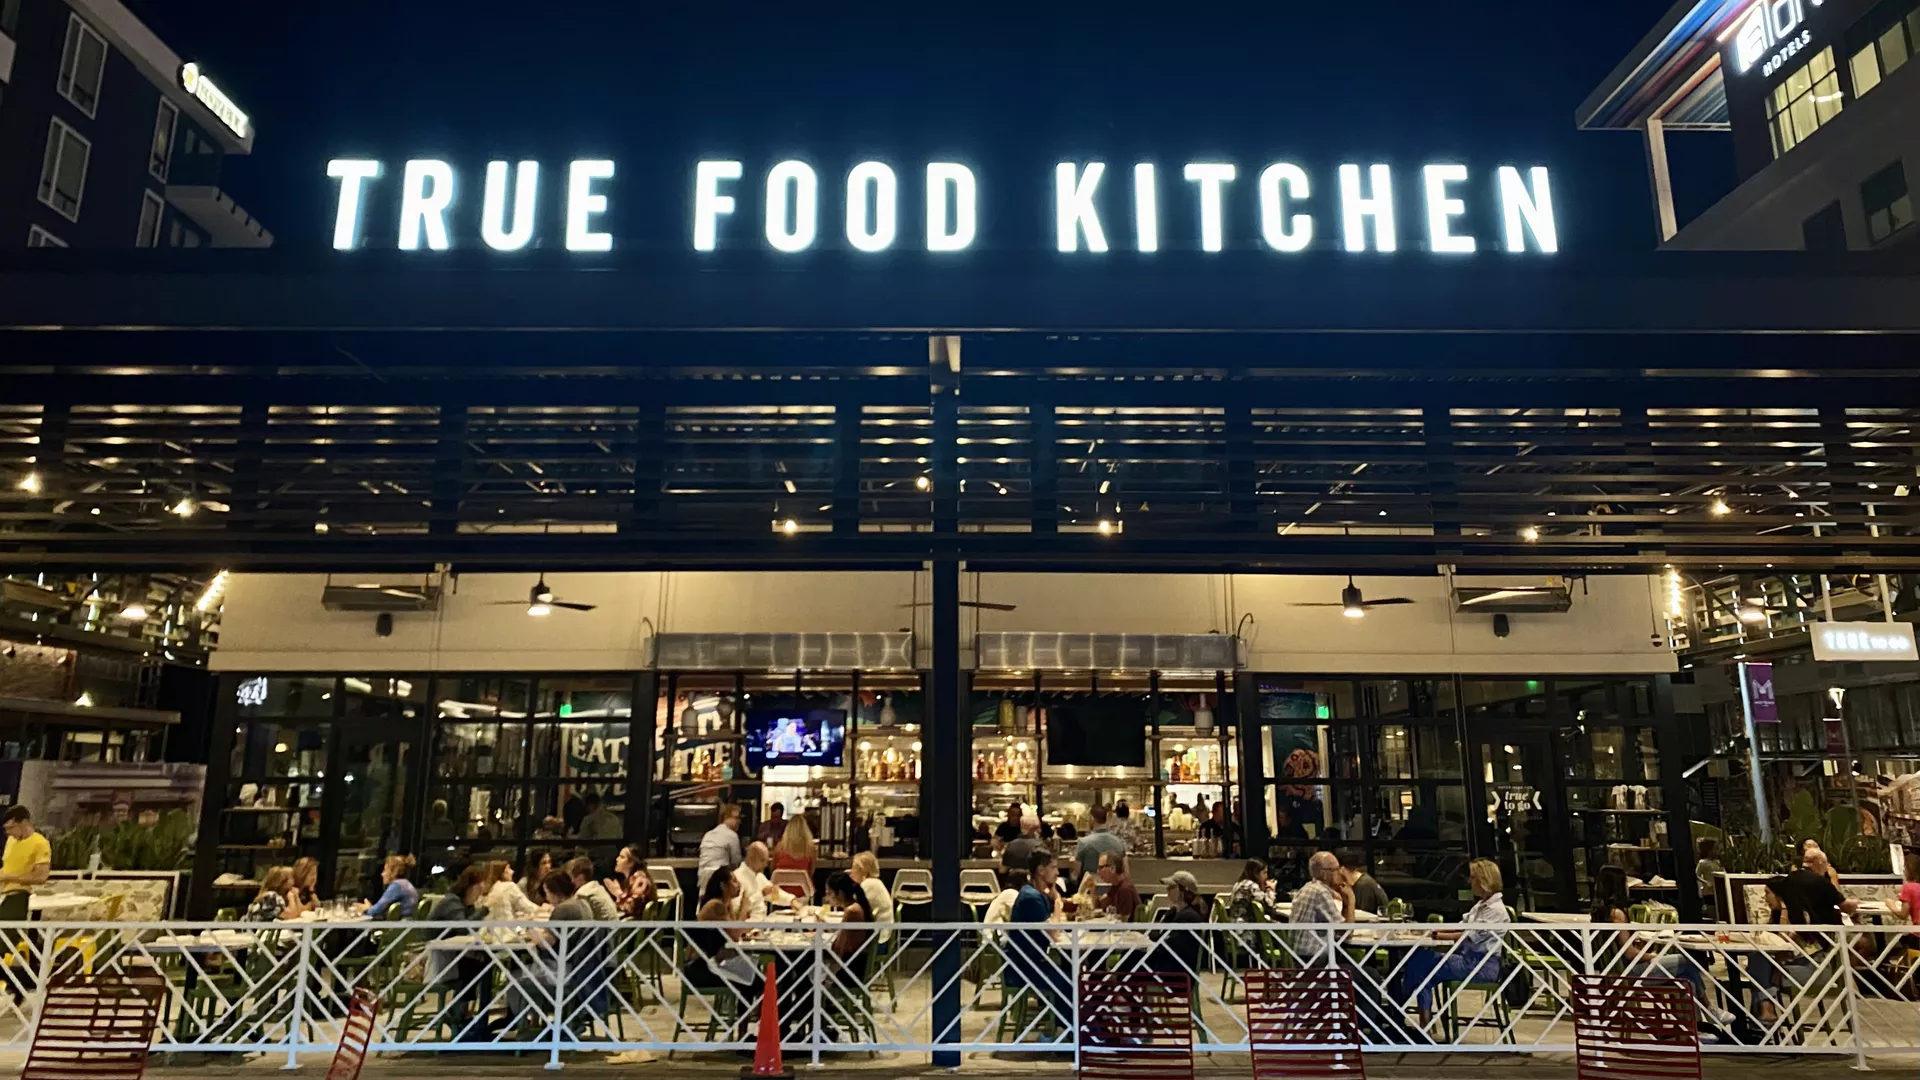 The exterior of True Food Kitchen